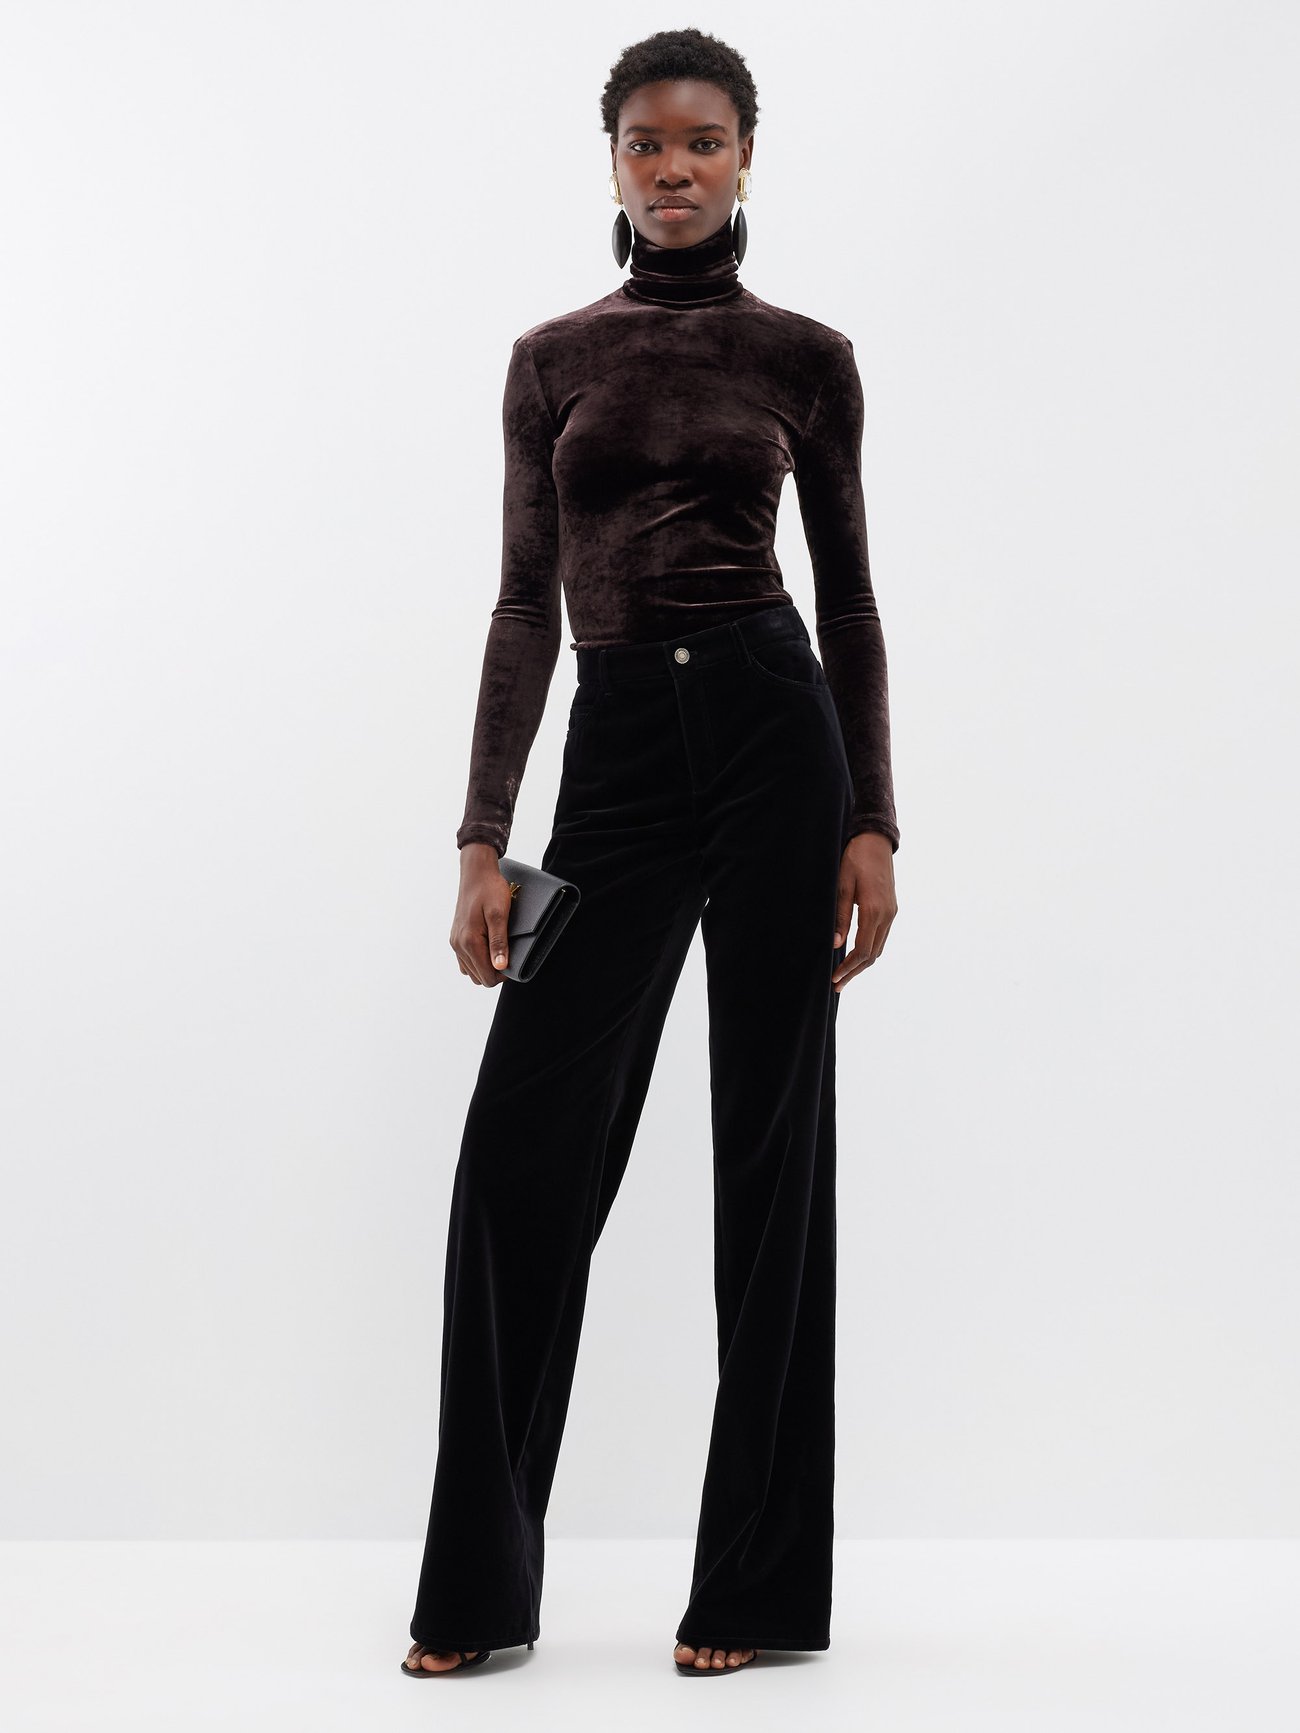 Anthony Vaccarello taps into a nonchalant glamour for Saint Laurent's Pre AW23 collection, exemplified by this languidly lustrous velvet top in dark-chocolate brown.